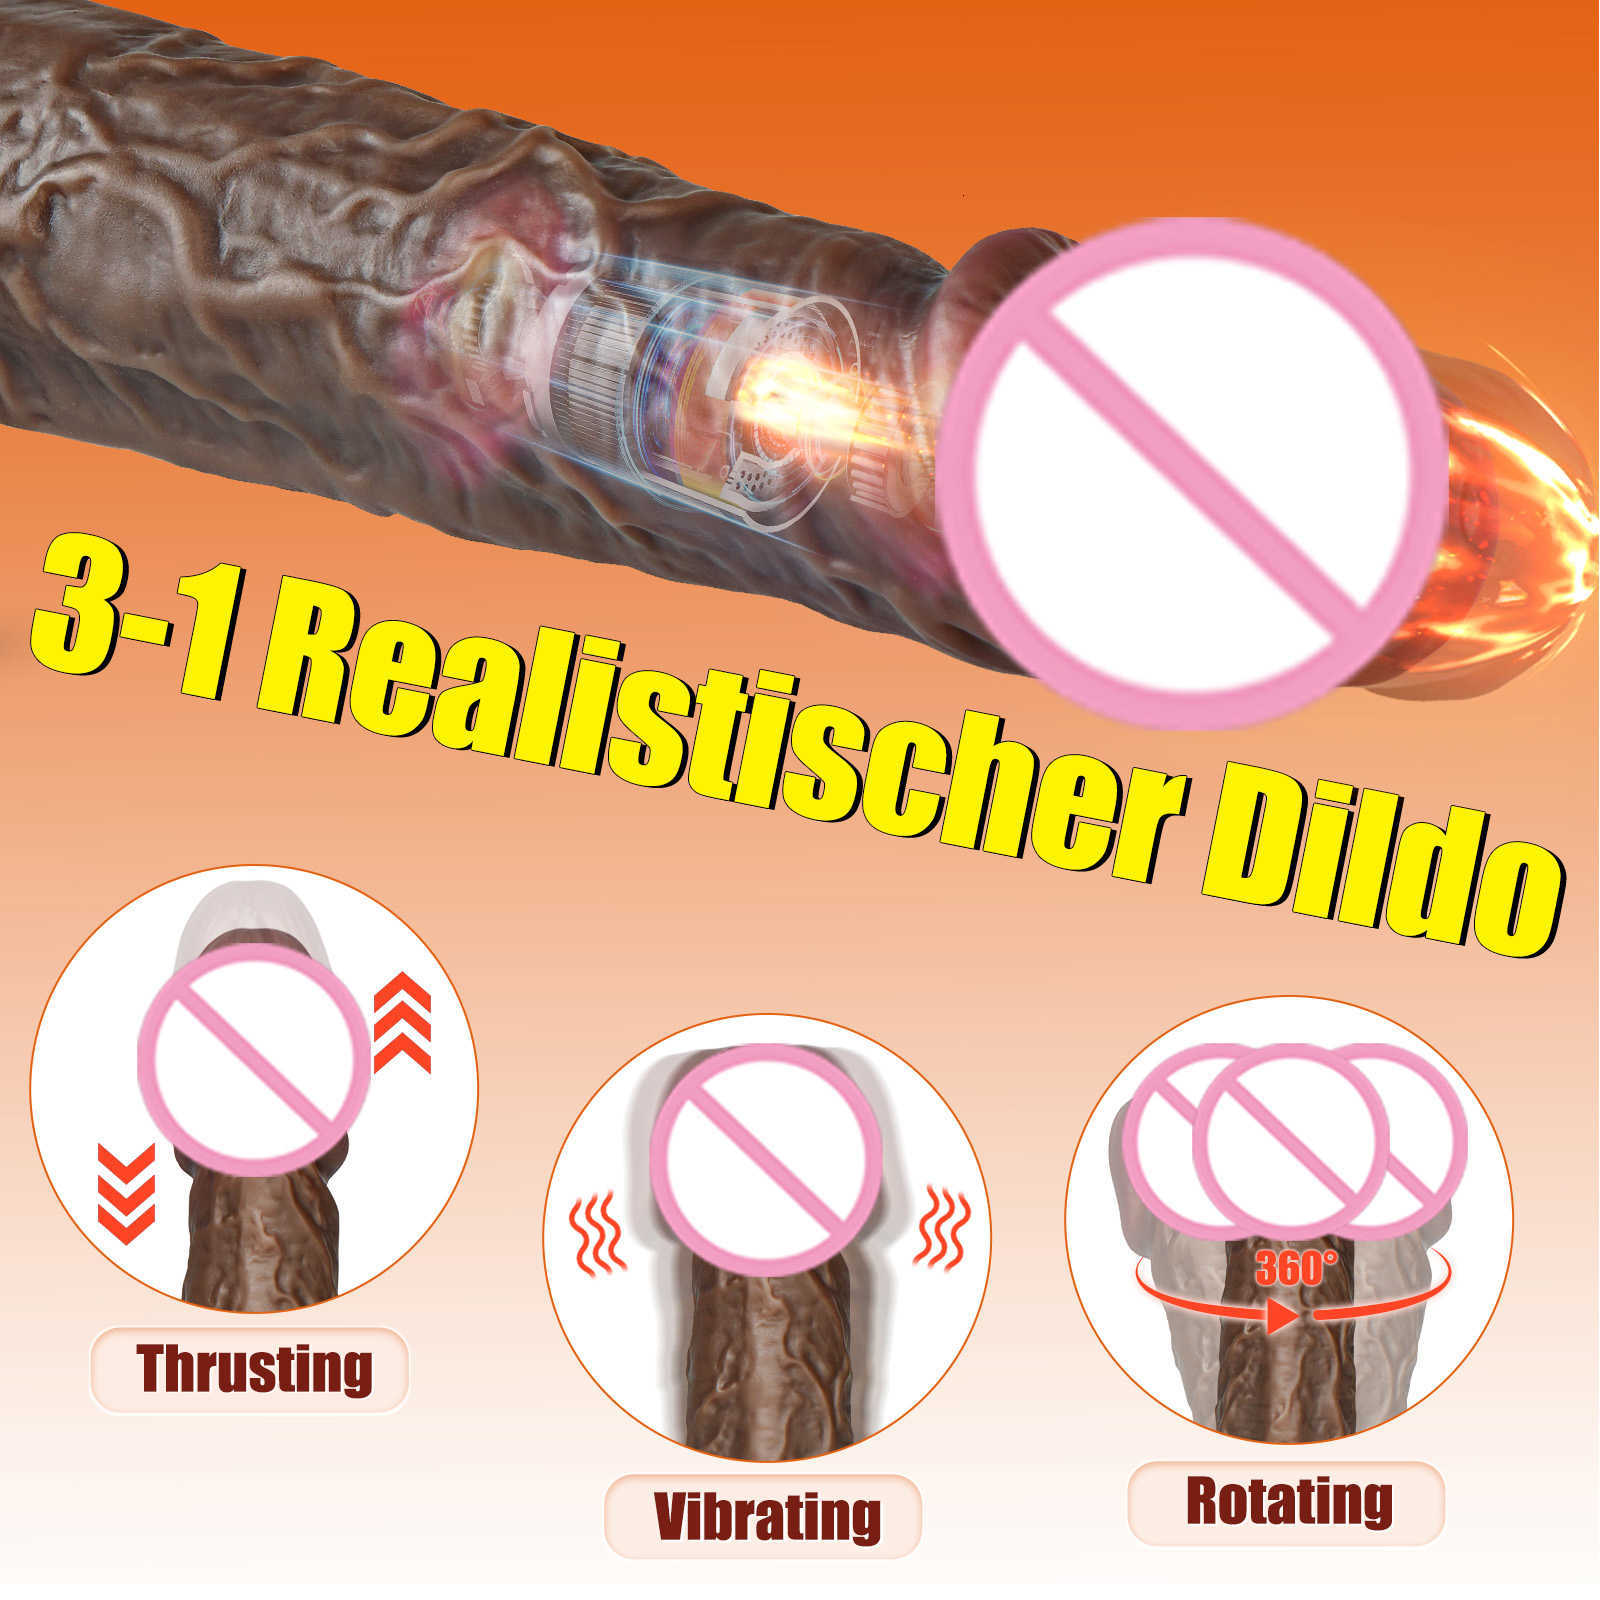 Massager Sohimi Realistic Dildo for Women 22 Cm Silicone Large Dildos G-spot Vibrators with Heating Function 360 Rotating Glane